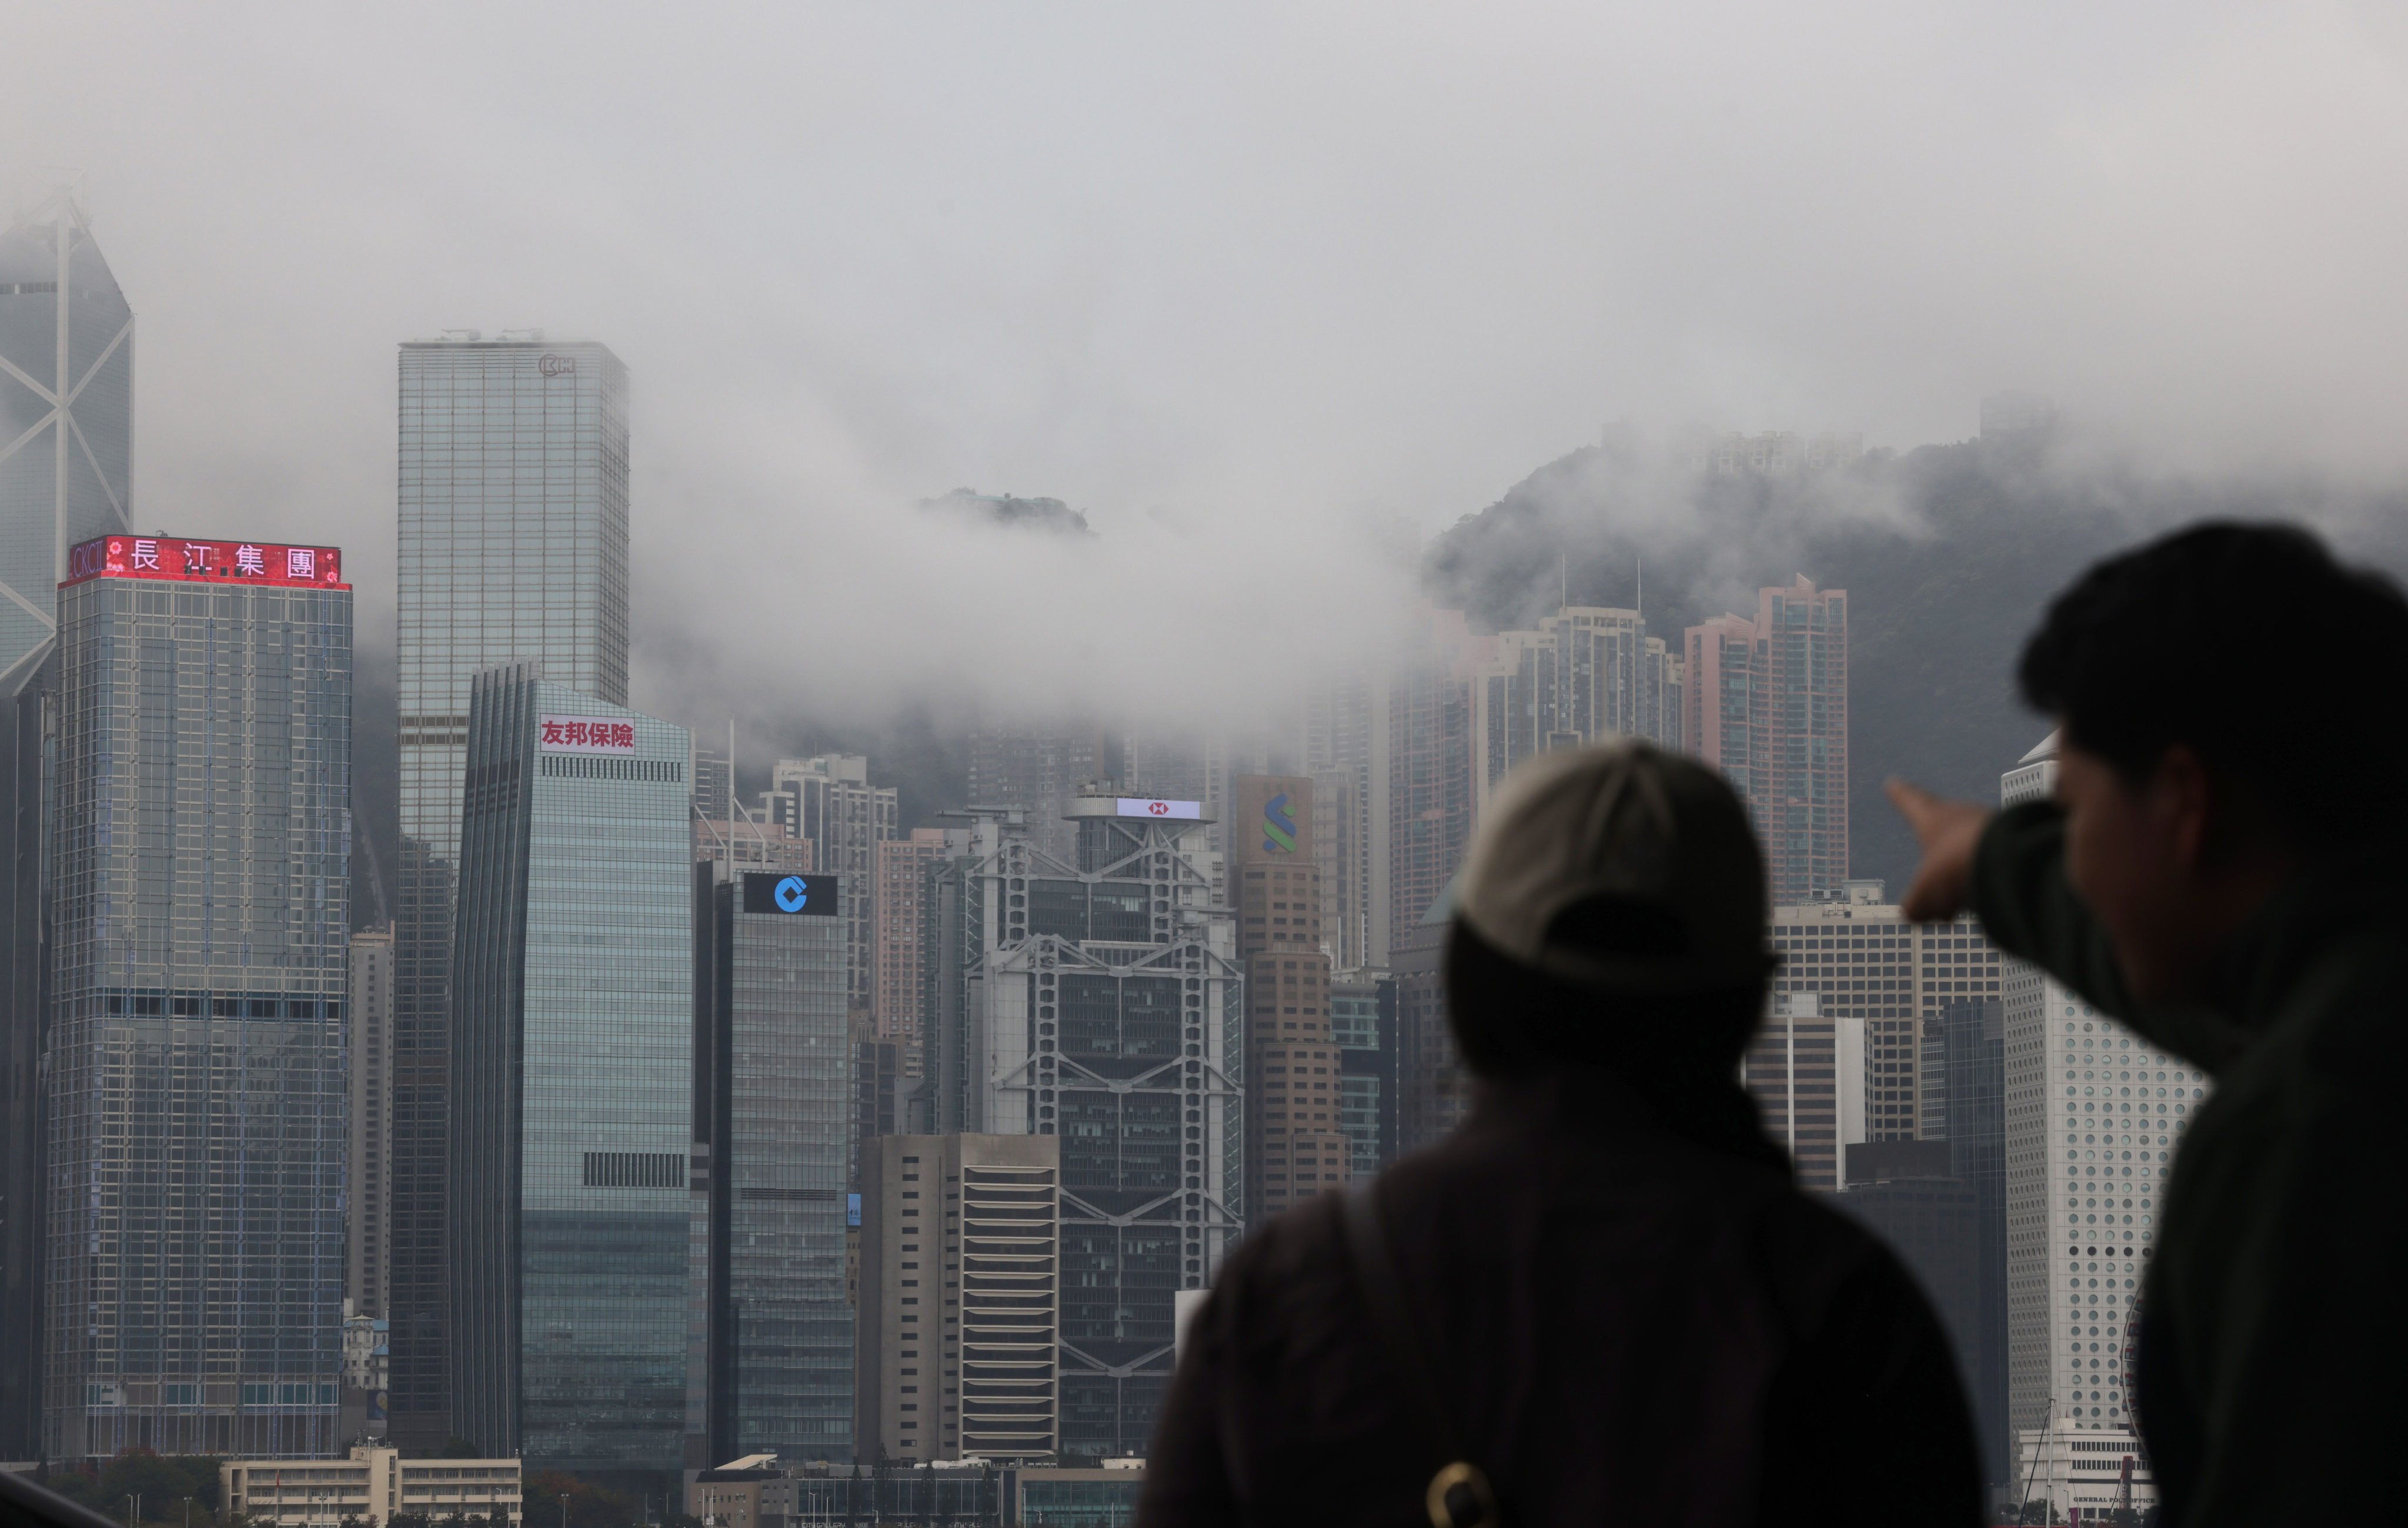 People on the Tsim Sha Tsui waterfront point to fog covering Hong Kong’s iconic skyline on March 11. Photo: Jelly Tse